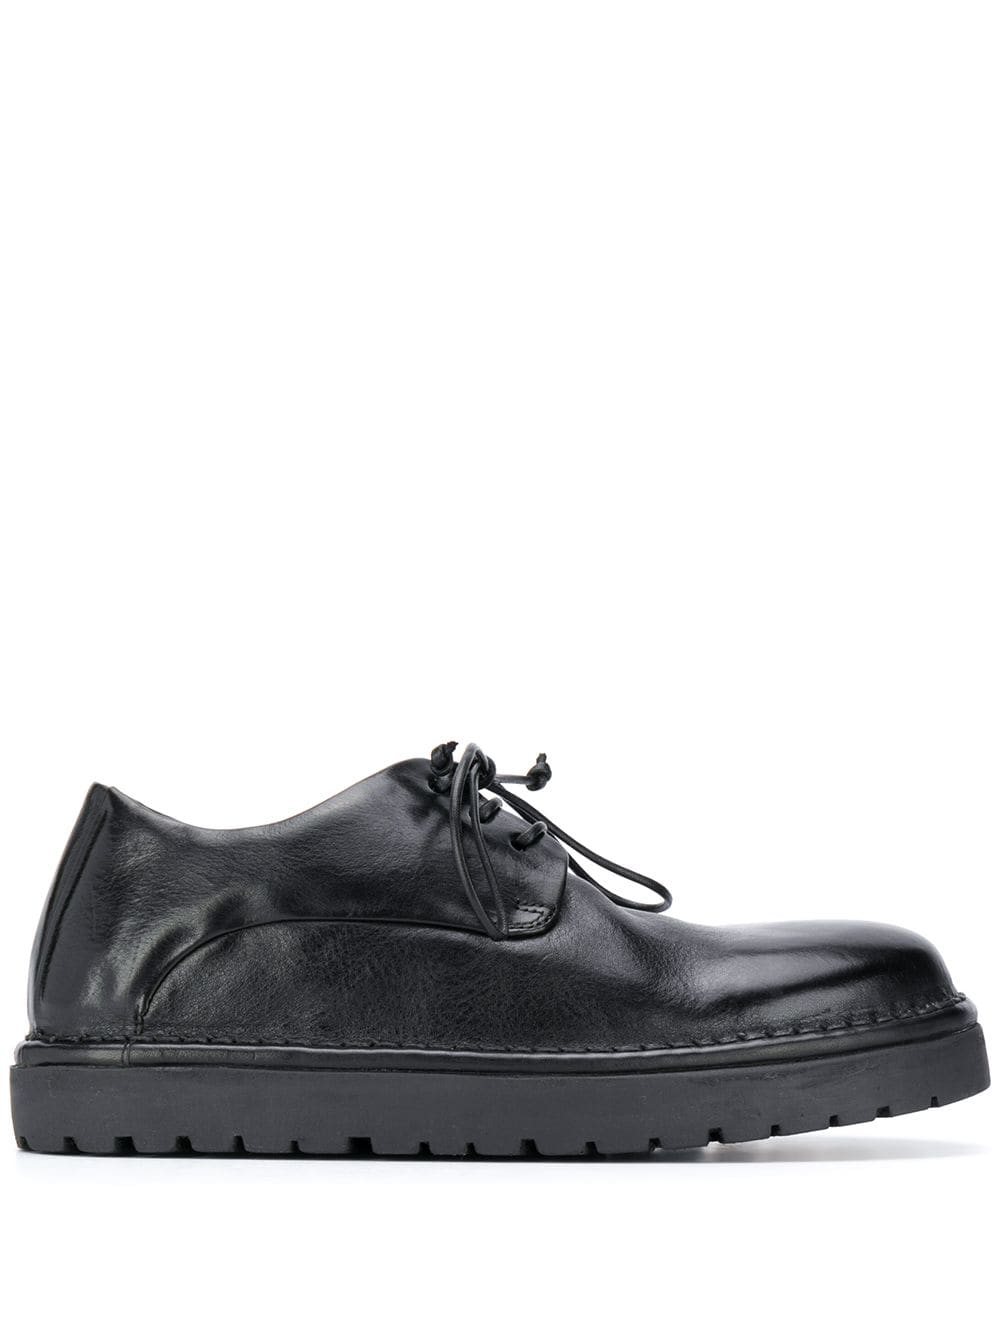 Marsèll Marsll lace-up shoes